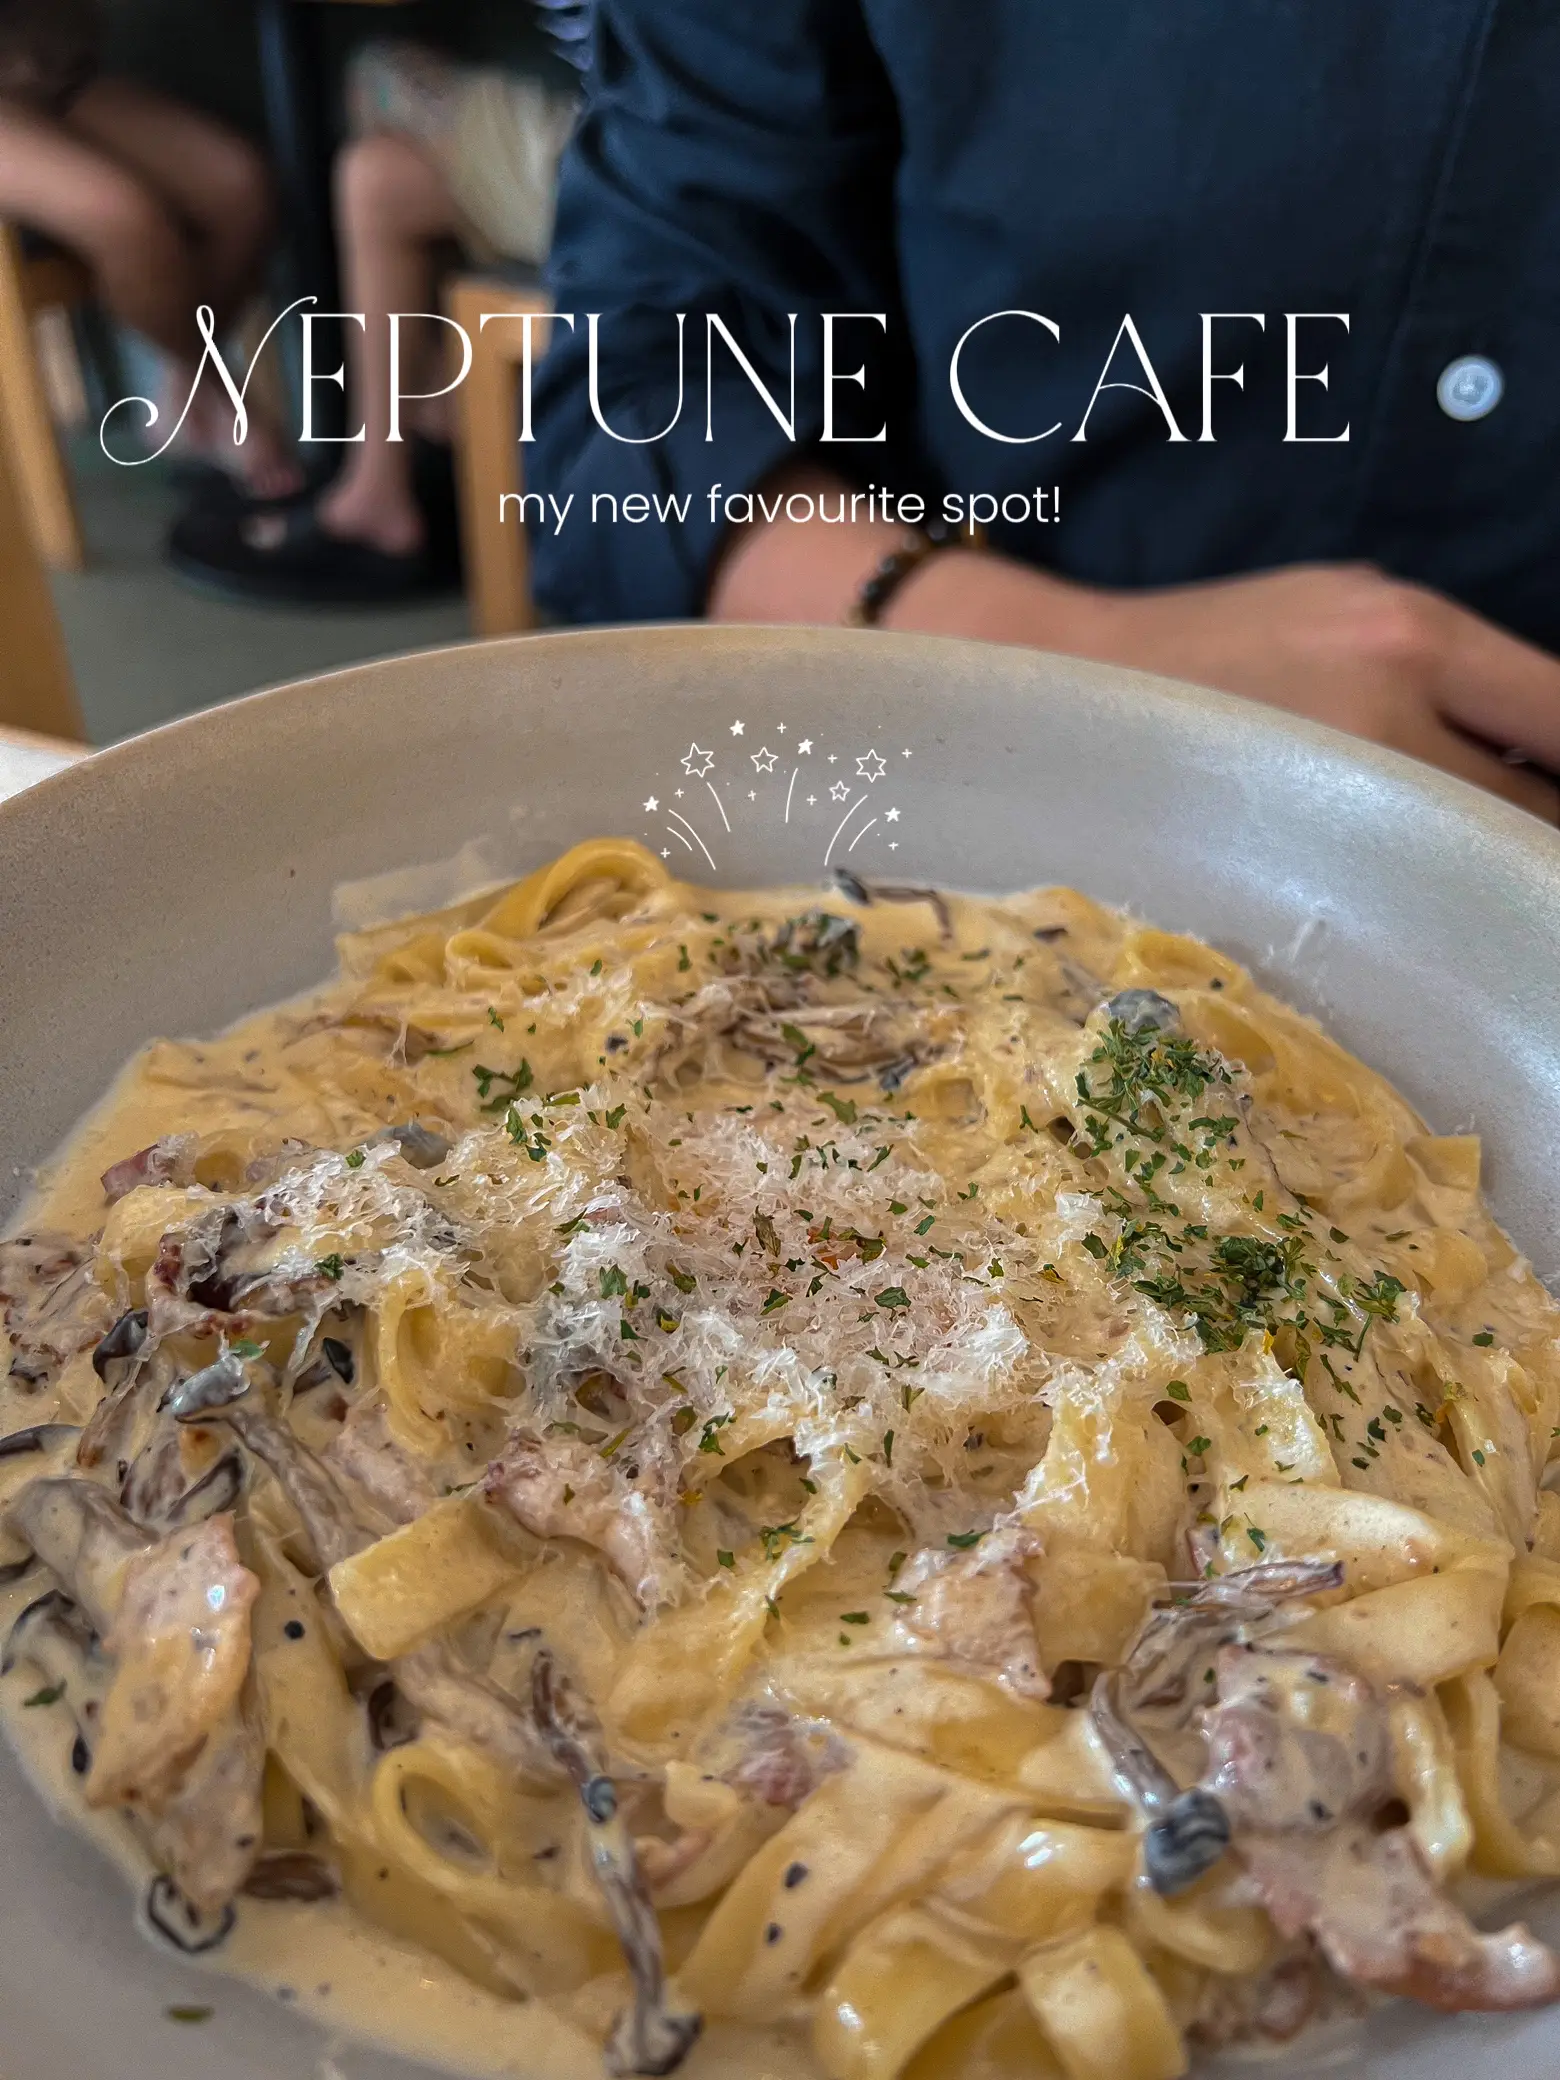 New fave spot for pasta — Neptune Cafe 's images